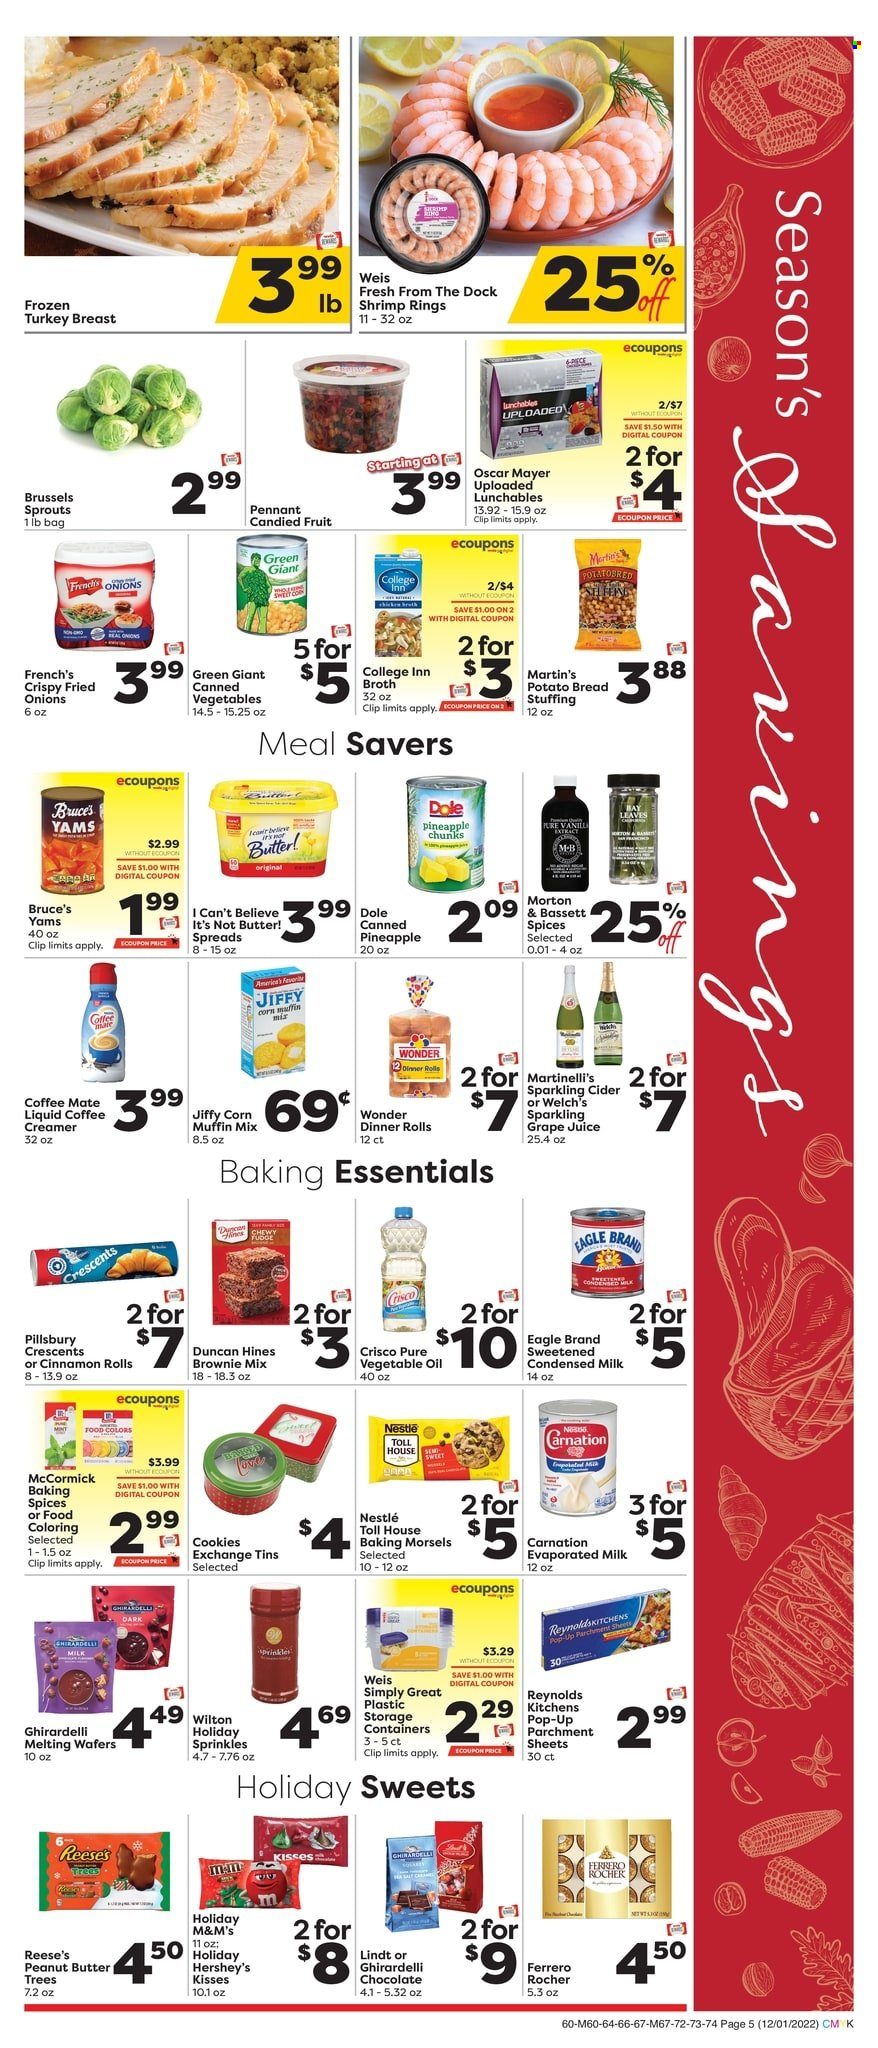 thumbnail - Weis Flyer - 12/01/2022 - 01/04/2023 - Sales products - bread, dinner rolls, cinnamon roll, brownie mix, muffin mix, corn, Dole, brussel sprouts, pineapple, Welch's, turkey breast, whole turkey, shrimps, Pillsbury, Lunchables, Oscar Mayer, Coffee-Mate, evaporated milk, condensed milk, I Can't Believe It's Not Butter, creamer, Reese's, Hershey's, cookies, Nestlé, wafers, chocolate, Lindt, Ferrero Rocher, M&M's, Ghirardelli, Crisco, broth, corn muffin, canned vegetables, vegetable oil, oil, peanut butter, juice, sparkling cider, sparkling wine, cider, Jiffy. Page 5.